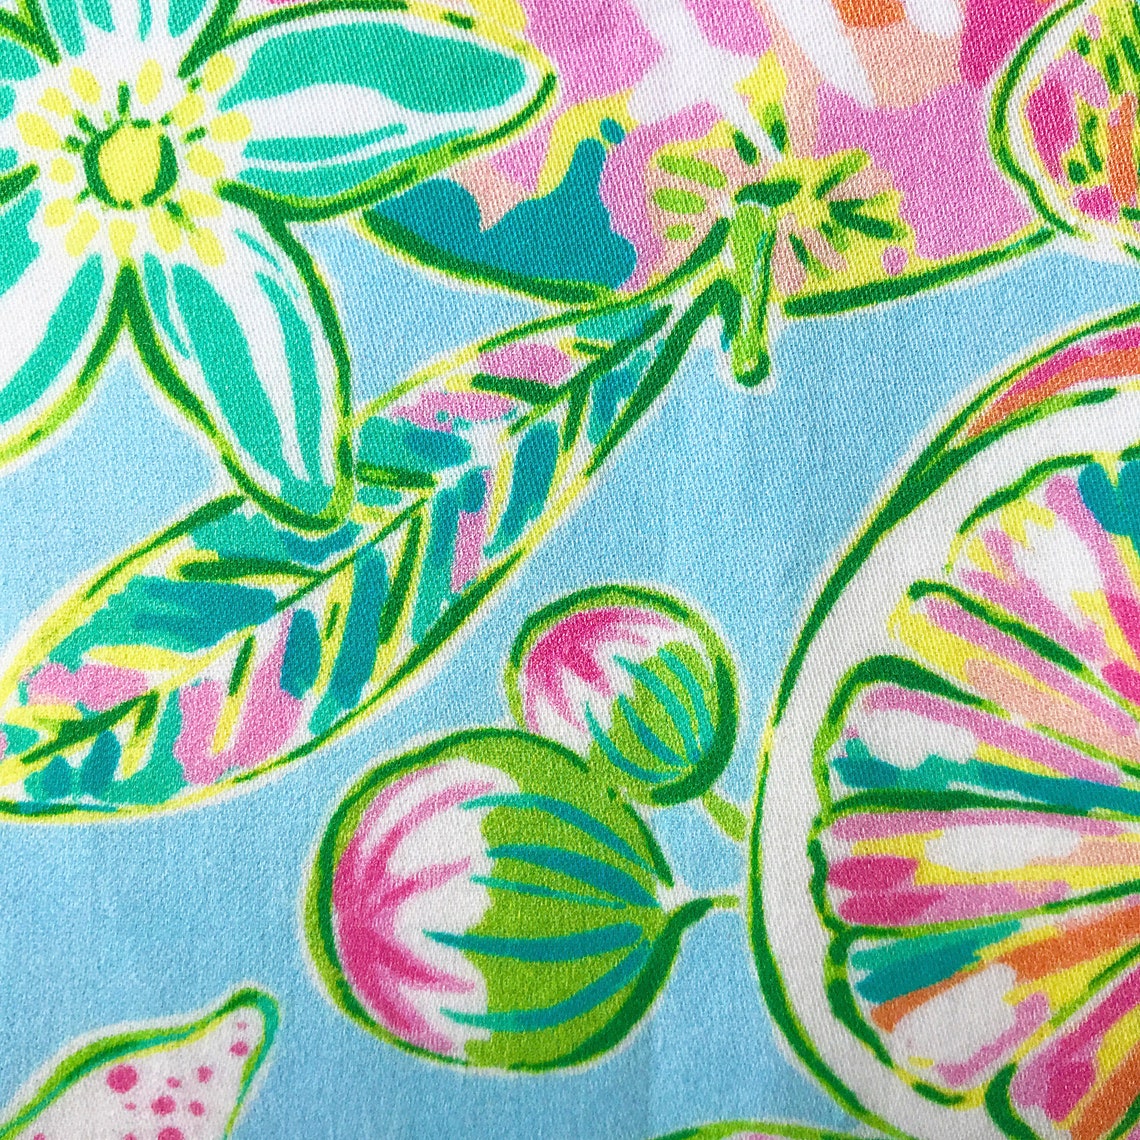 Pink and Blue Preppy Citrus Print Fabric 100% cotton sateen | Etsy